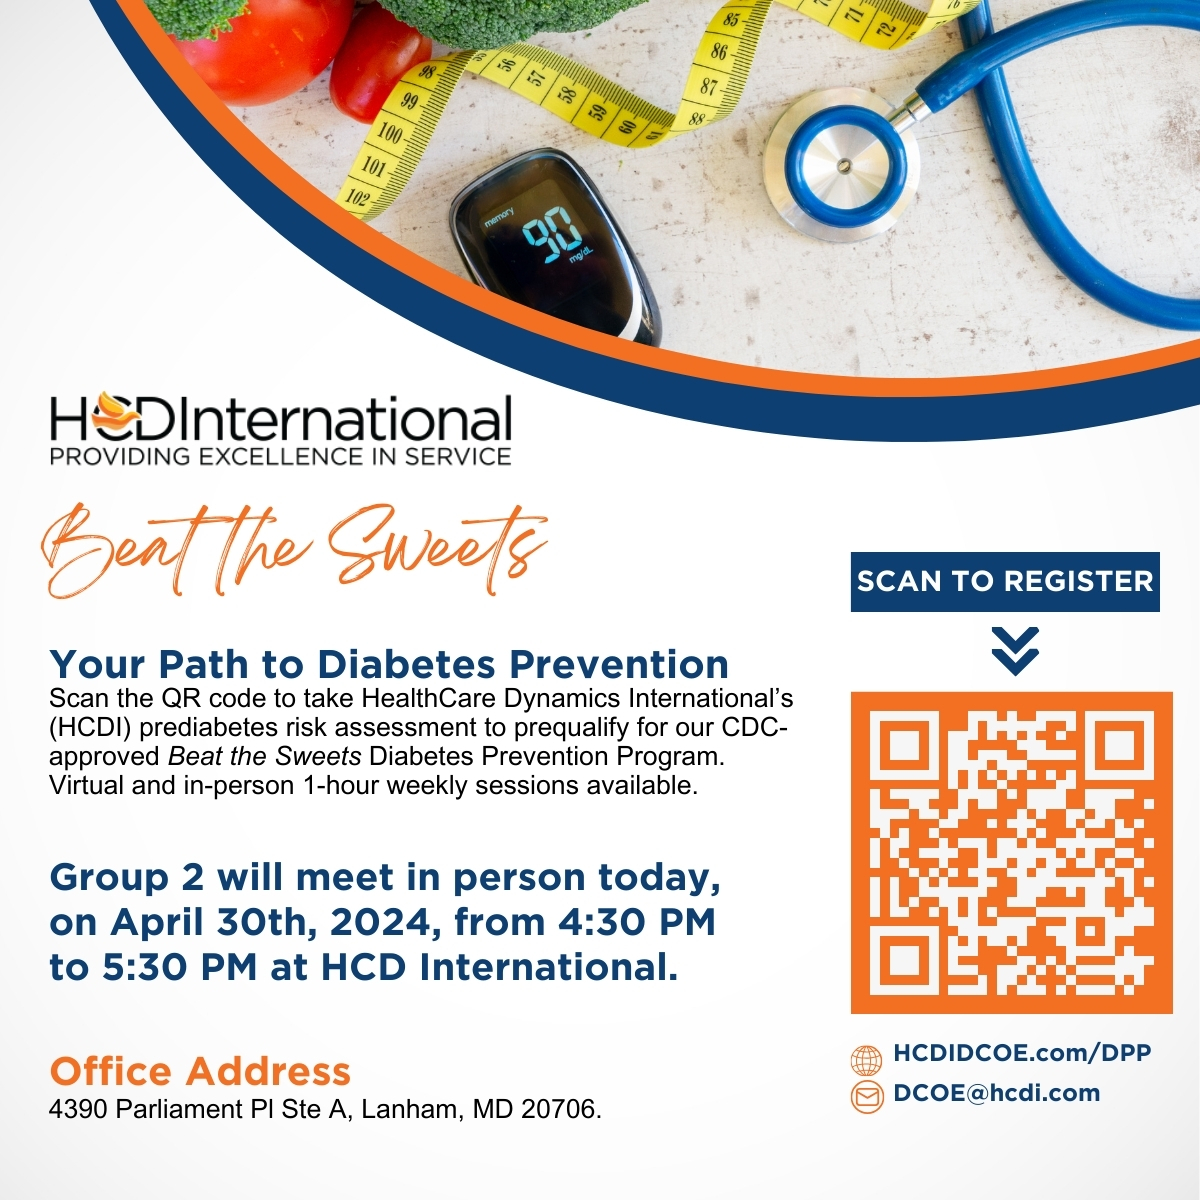 Group 2 meets today from 4:30 to 5:30 p.m. To prequalify, complete our Prediabetes Risk Assessment and contact HCDI for more. Scan the QR code or visit ow.ly/NERy50RofB4. #MarylandHealth #DiabetesPrevention #PrediabetesAwareness #HCDI #HCDInternational